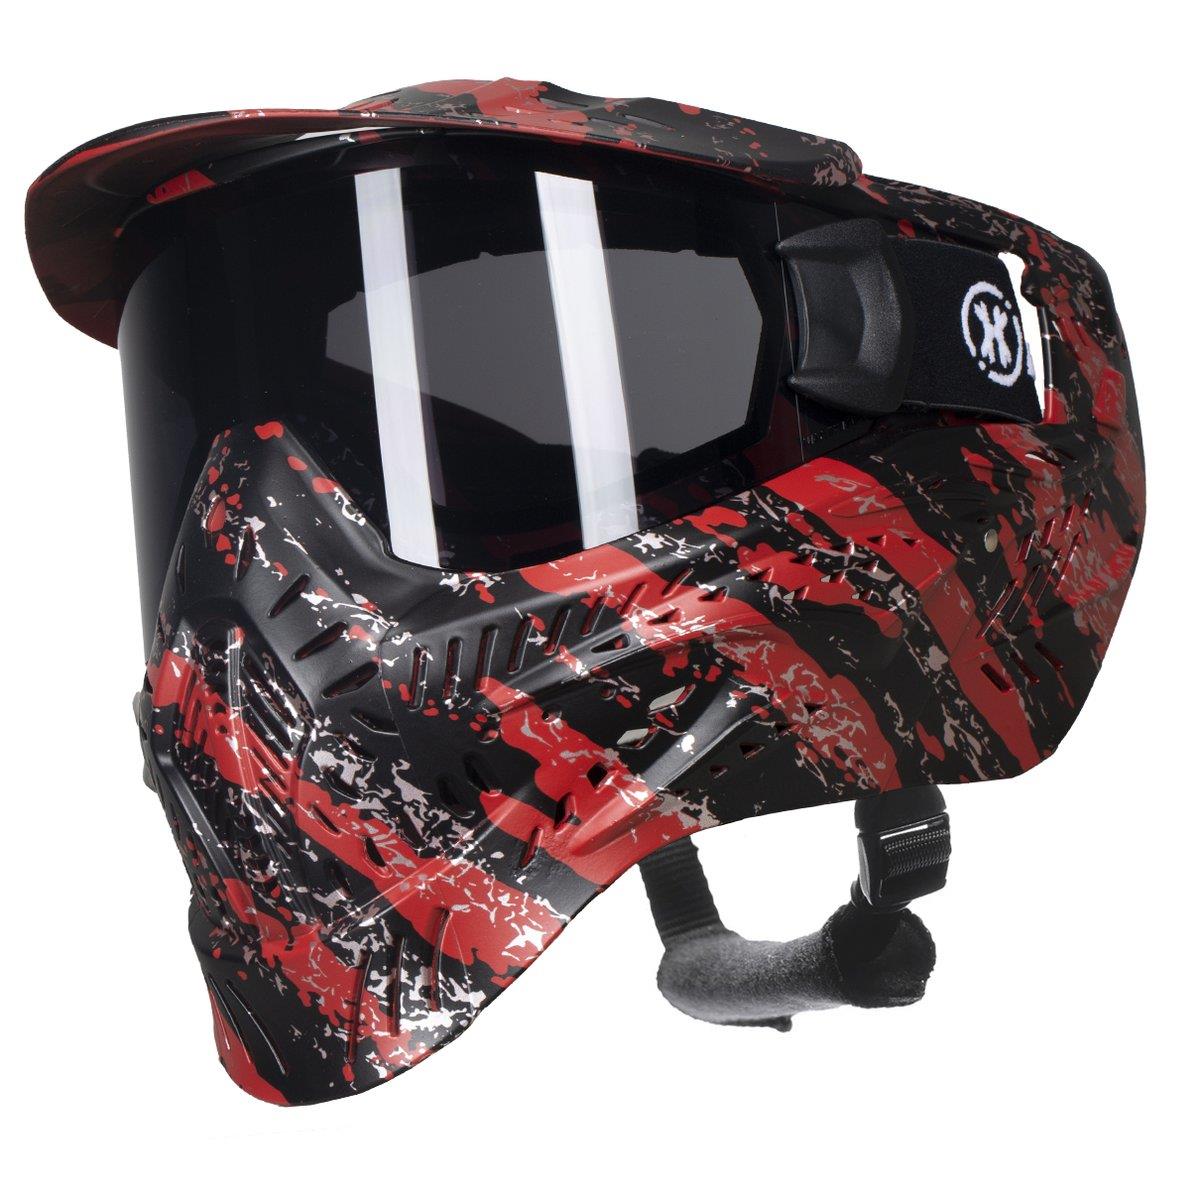 HK Army HSTL Goggle Thermal Dual Paned Paintball Mask - Fracture Black/Red HK Army